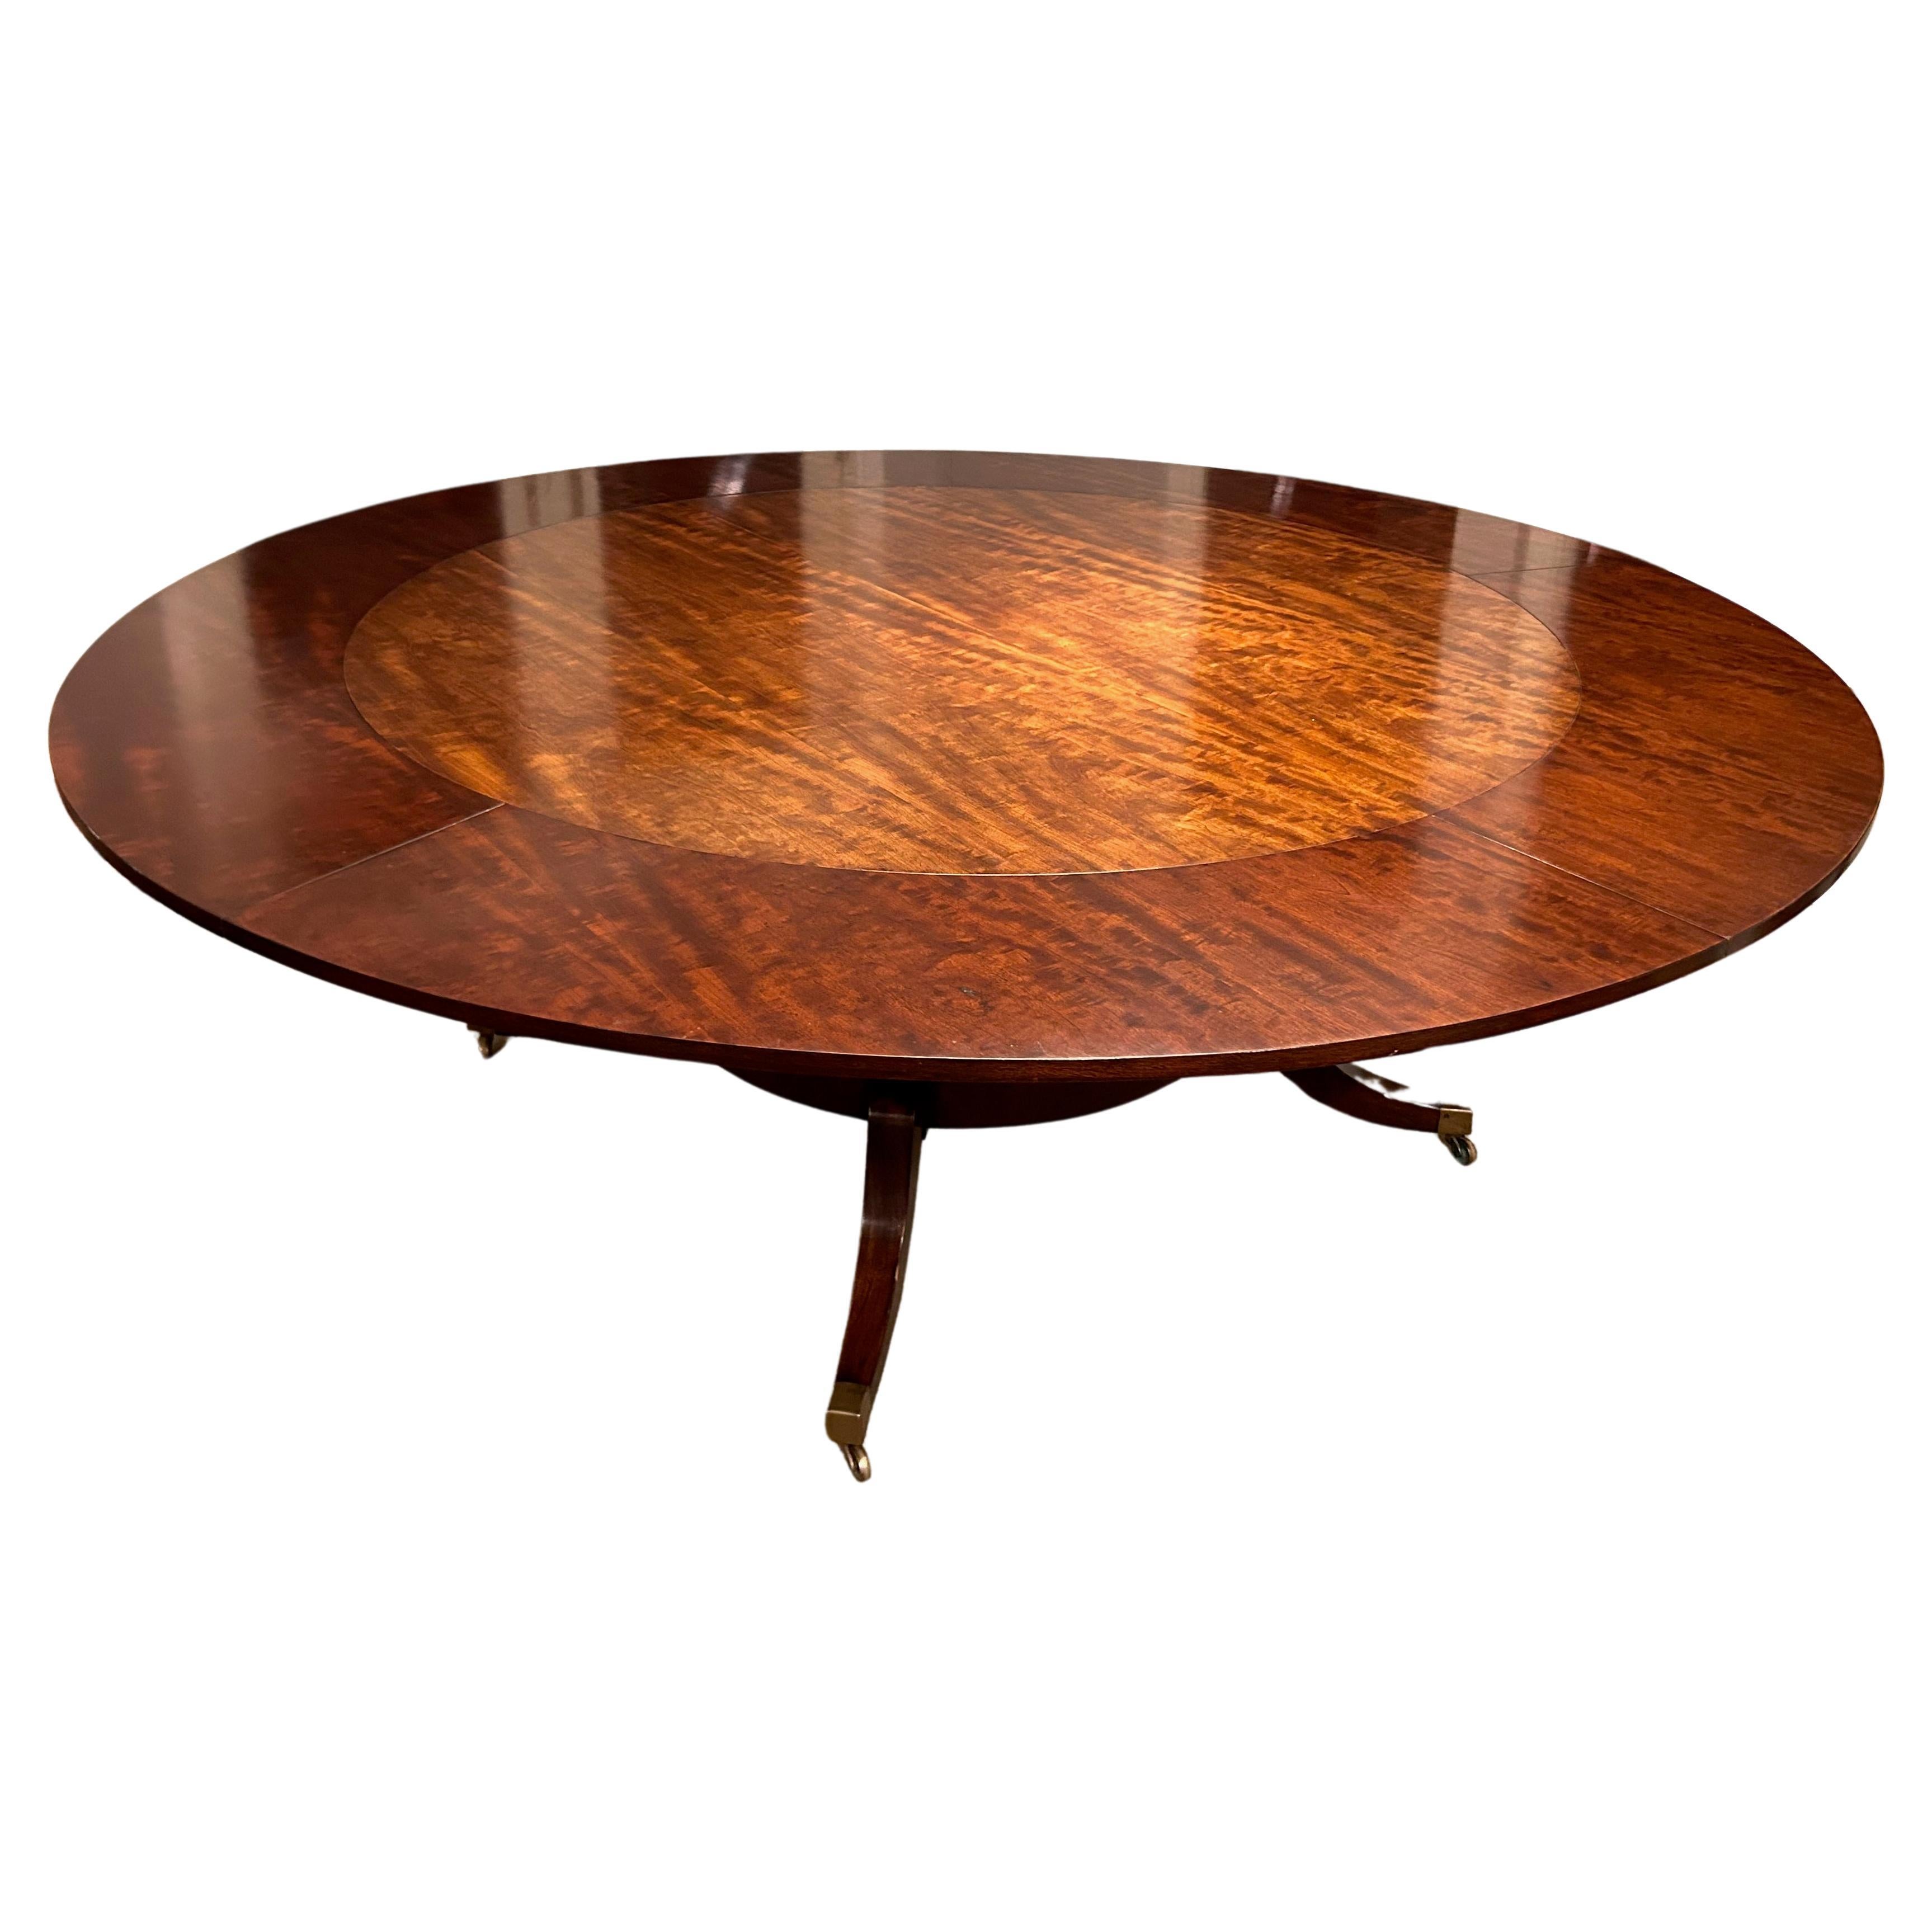 1940's Round Mahogany Veneer Dining Table with Crescent Leaves and Leaf Cabinet